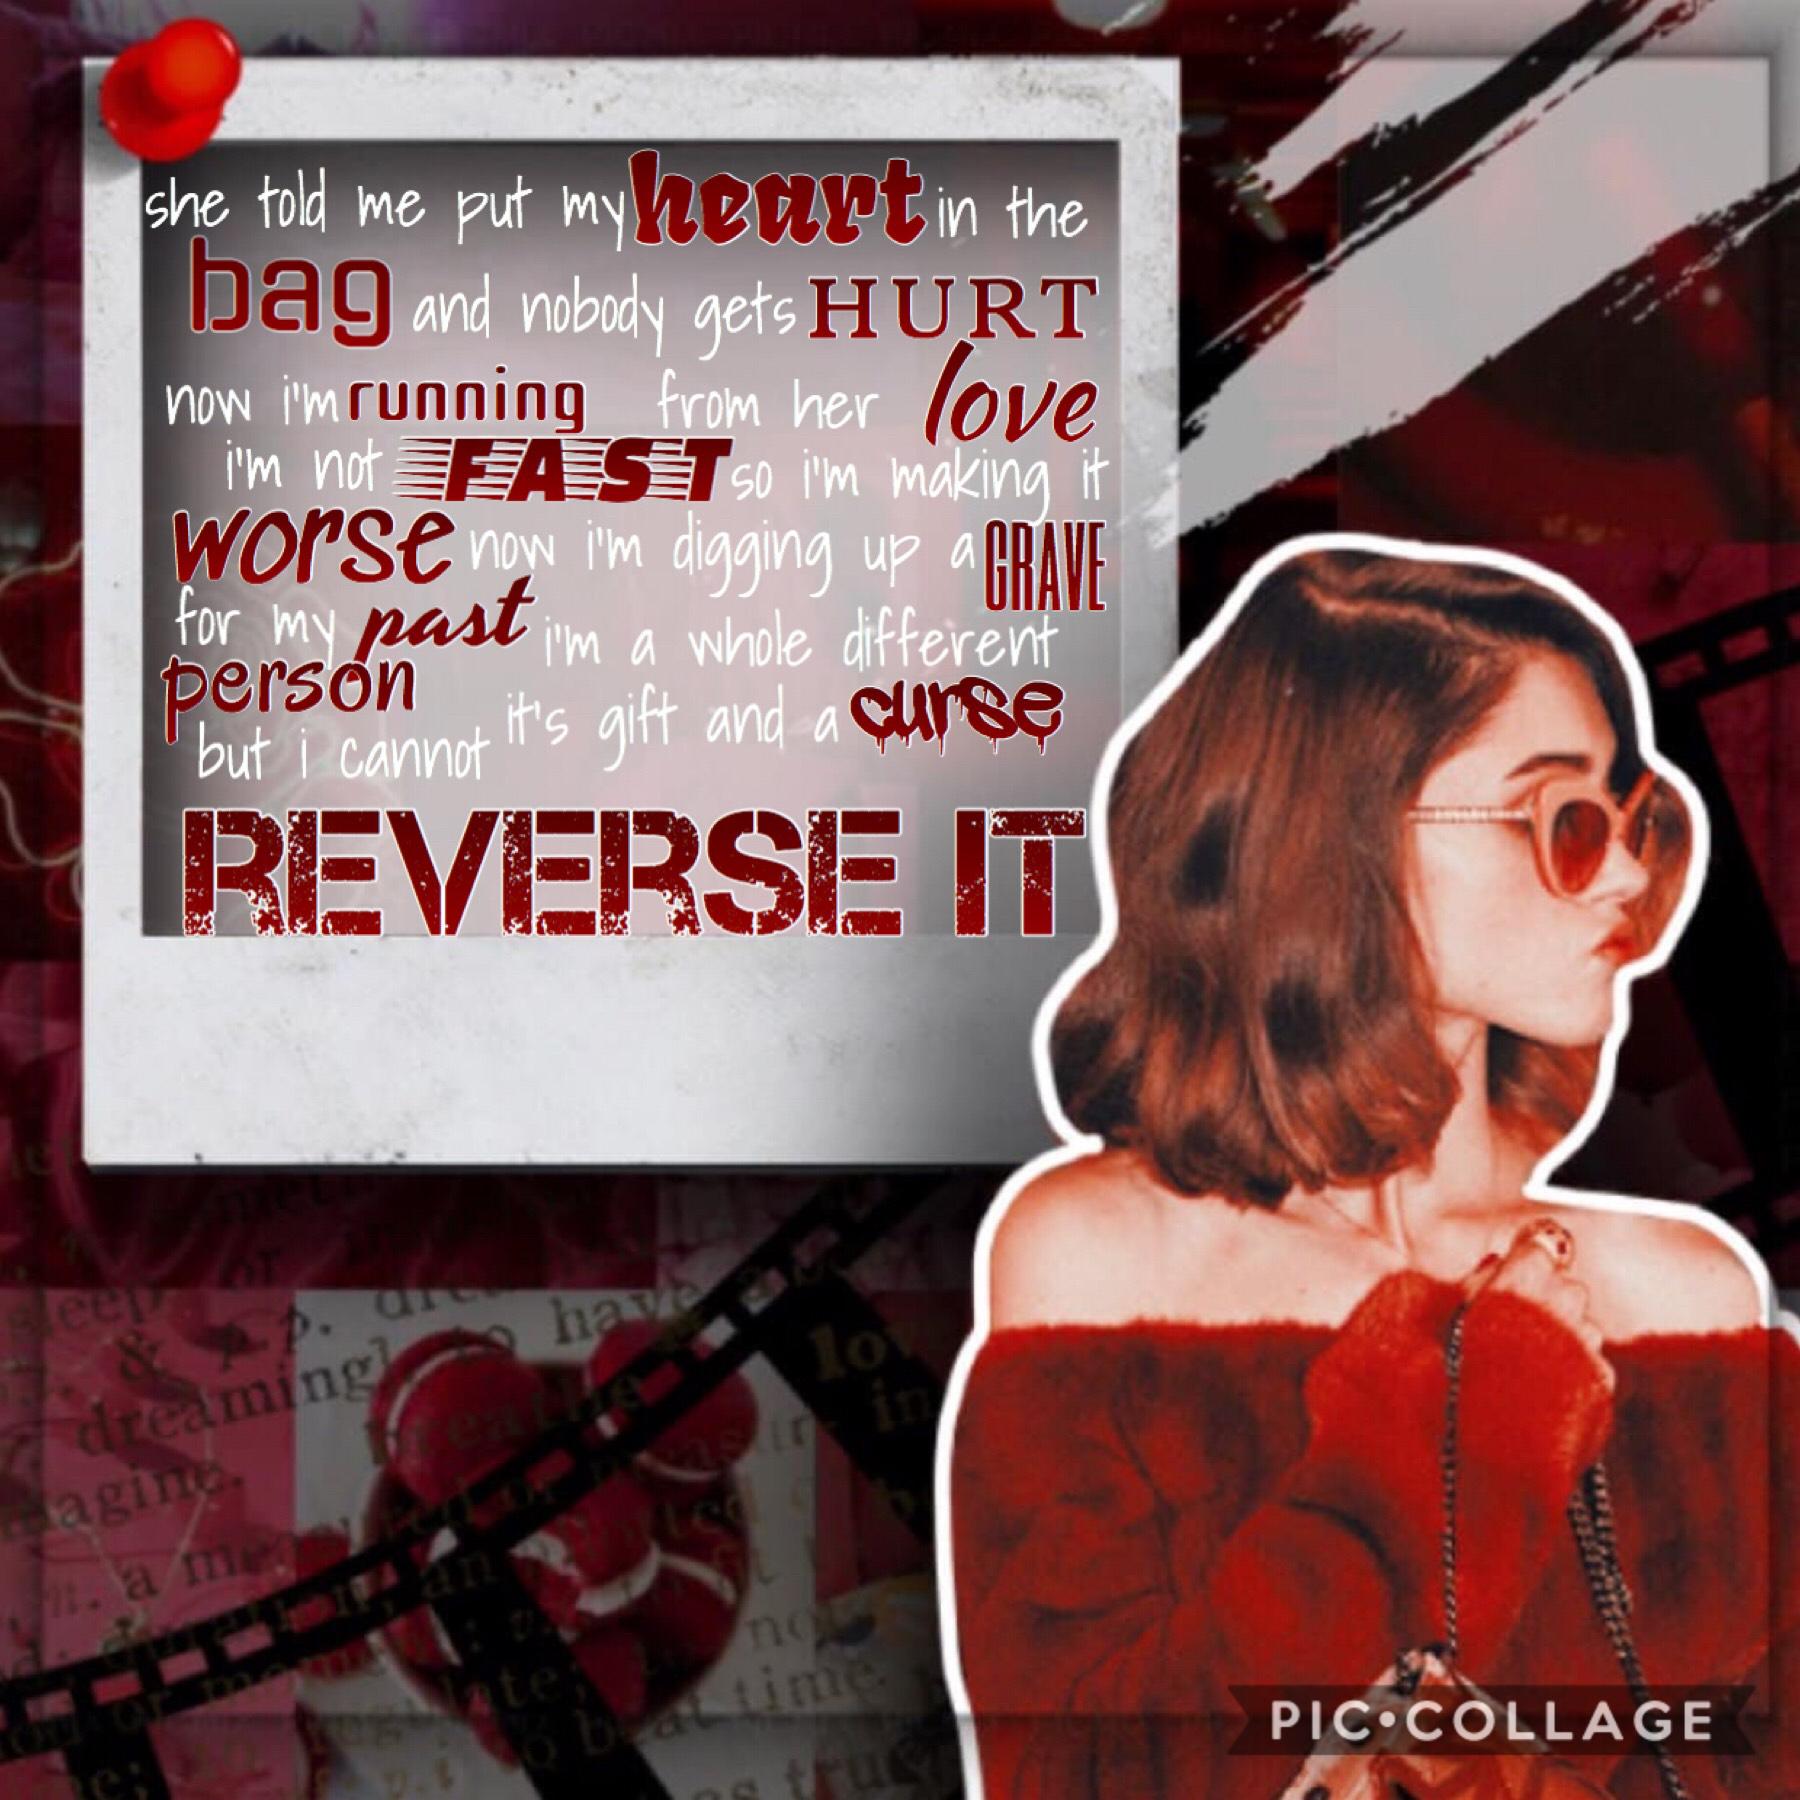 collab with hopeful_editor14!
go check her out her collages are honestly amazing❤️